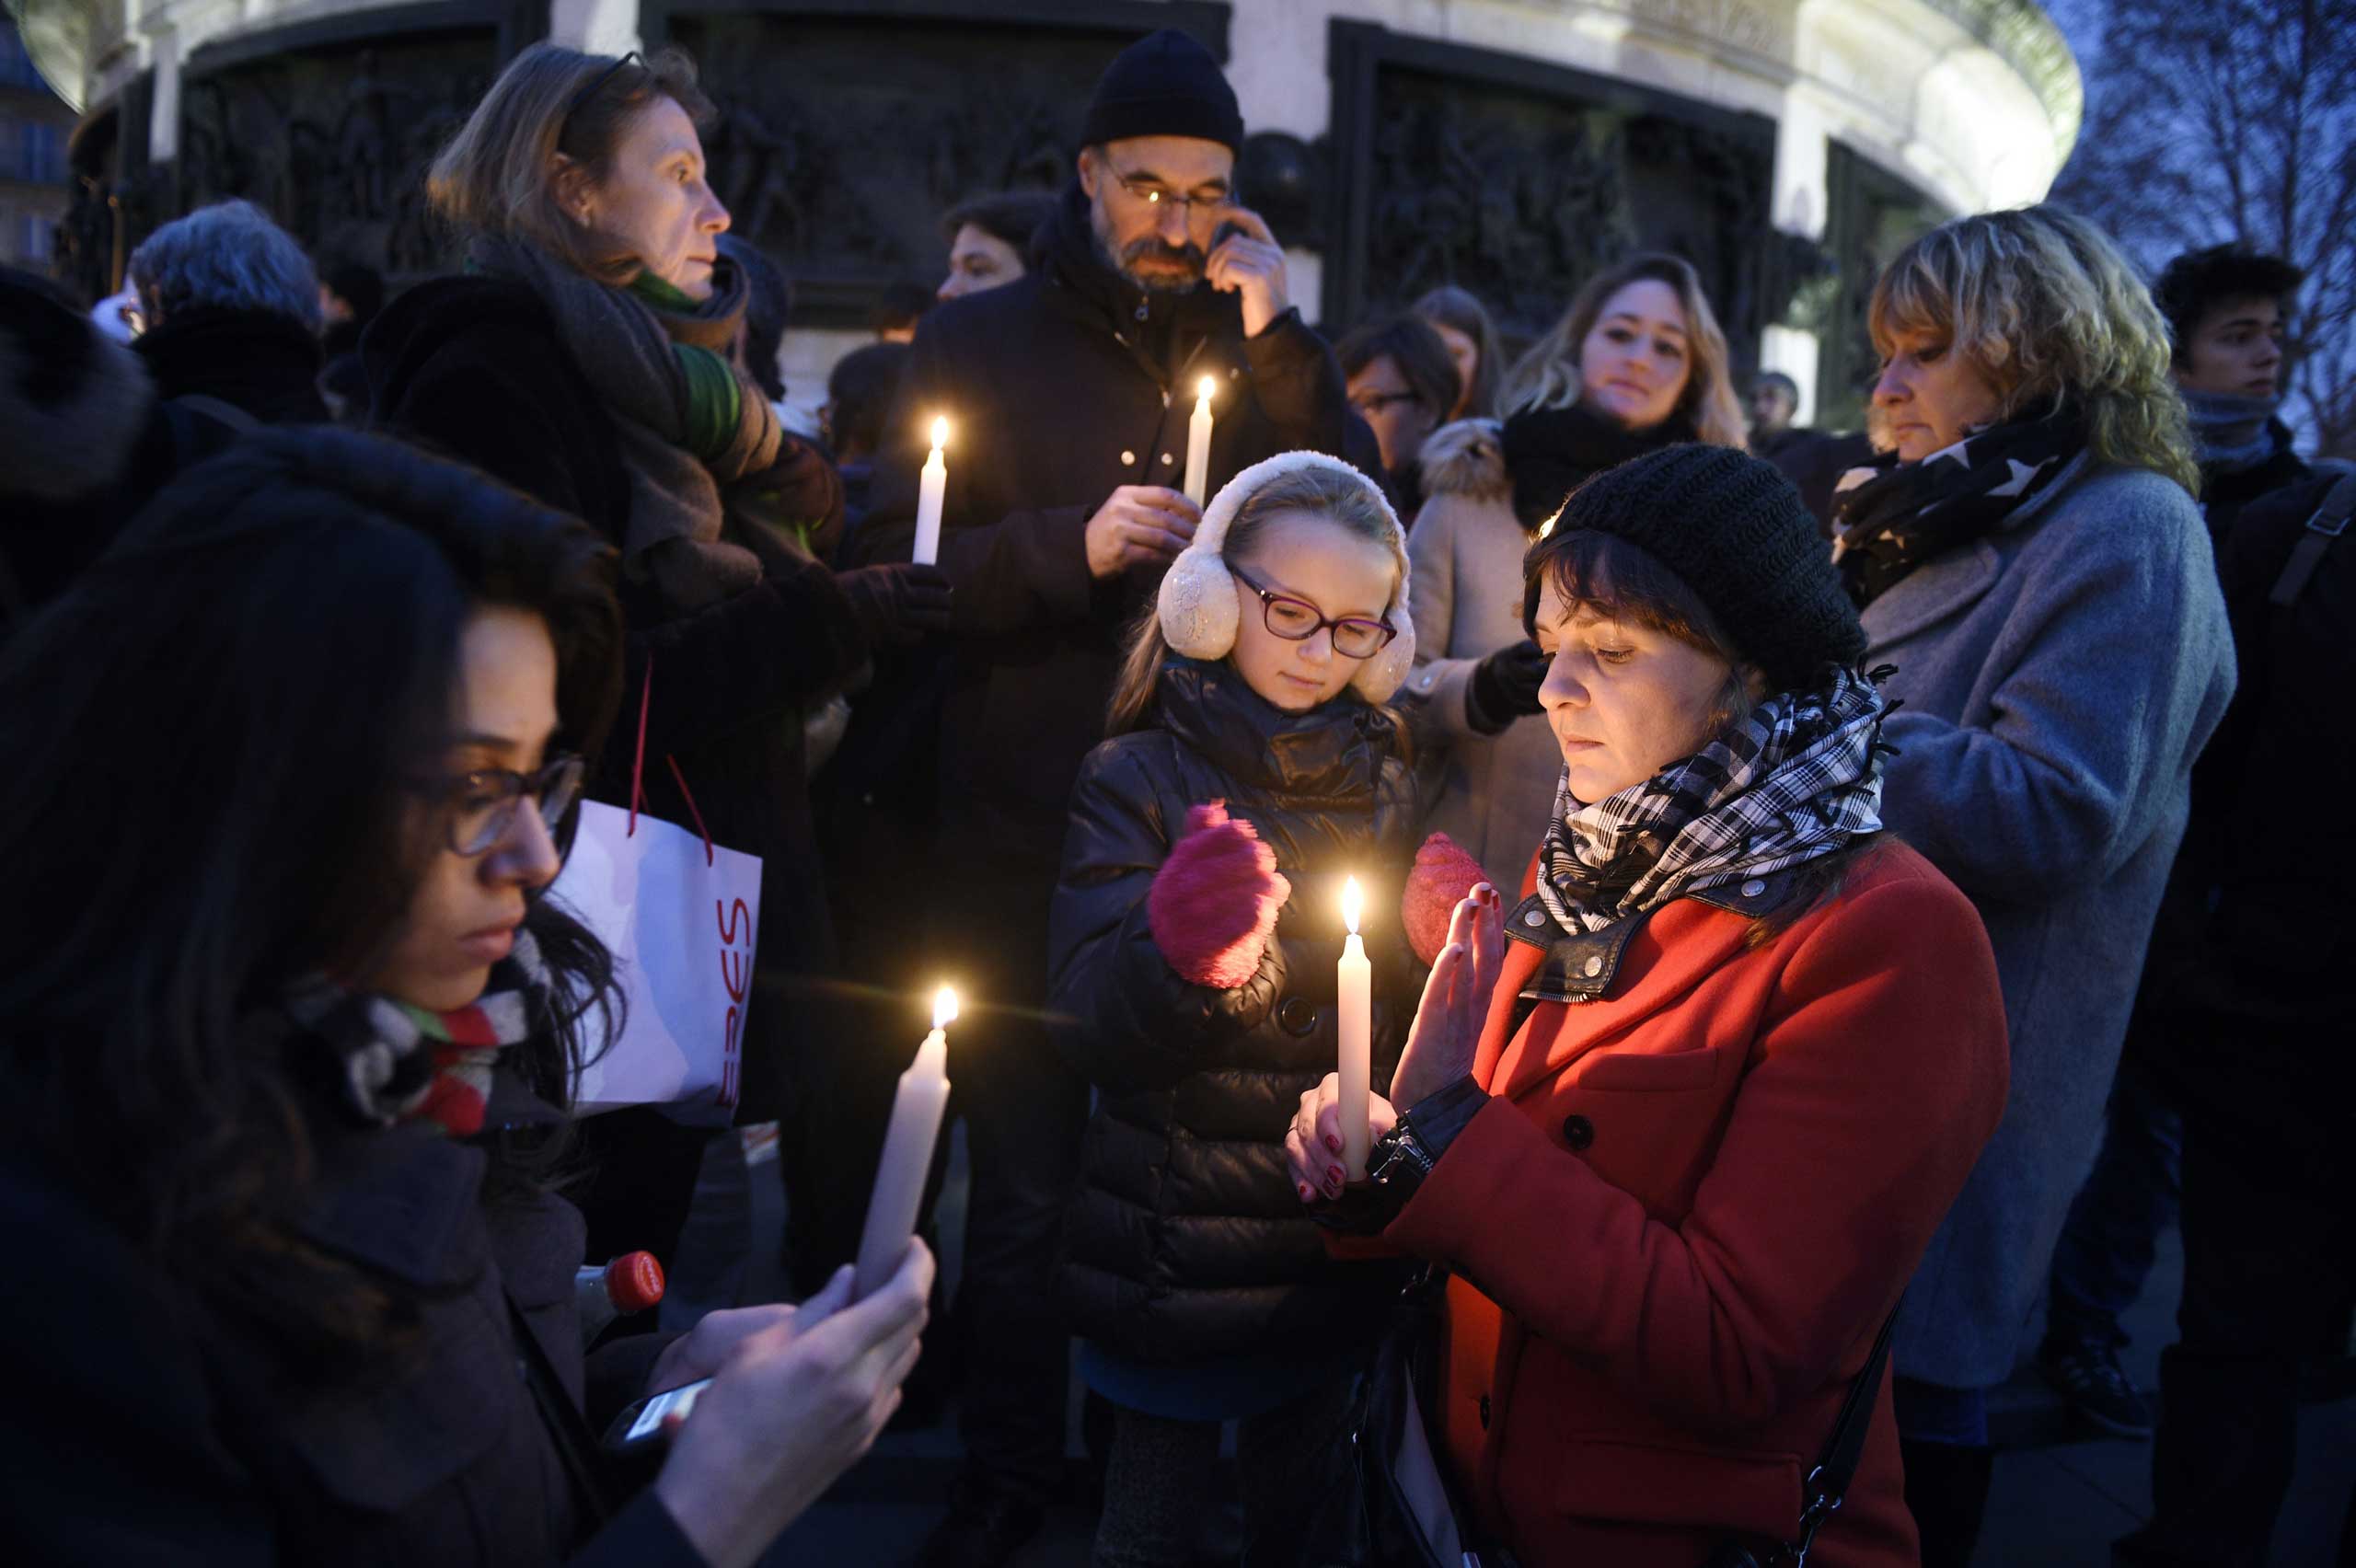 People light candles during a rally in support of the victims of the attack by gunmen at French satirical newspaper Charlie Hebdo at the Place de la Republique in Paris, on Jan. 7, 2015. (Martin Bureau—AFP/Getty Images)